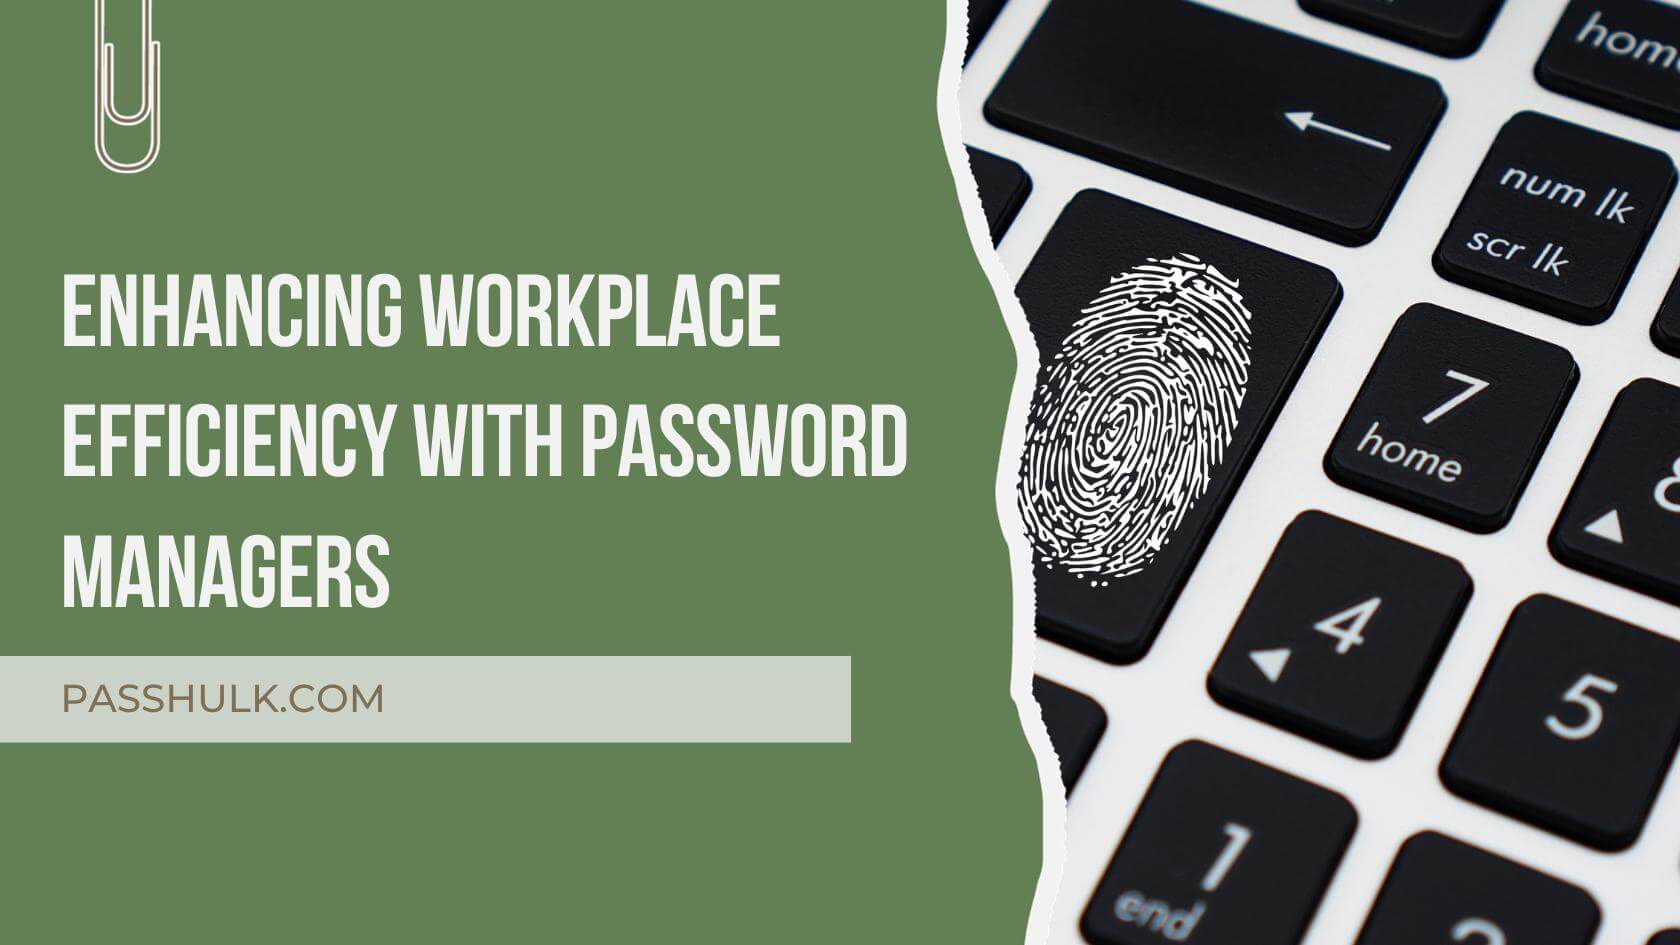 Enhancing Workplace Efficiency with Password Managers